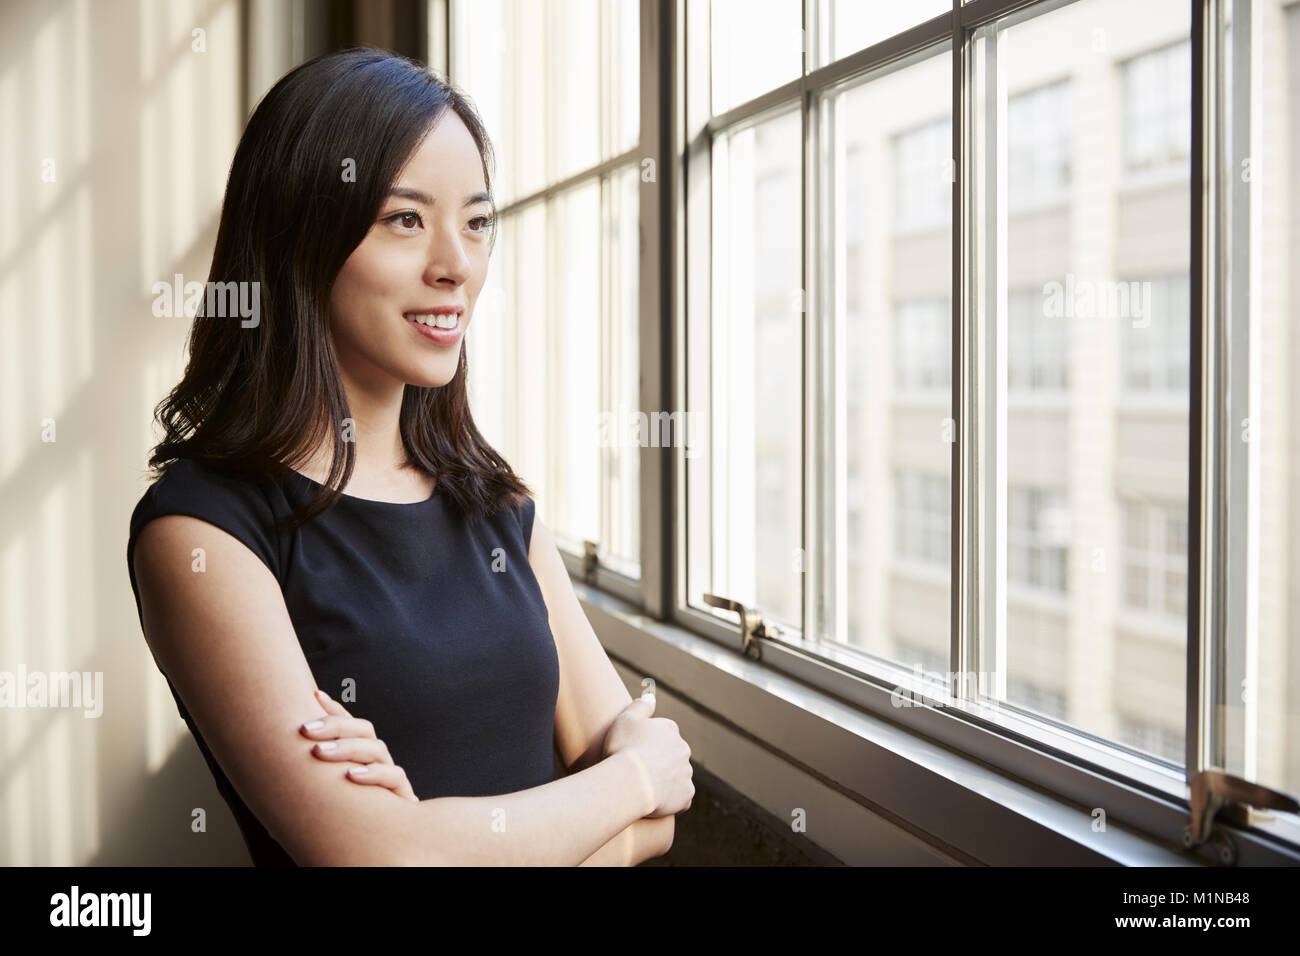 Smiling young Chinese business woman looking out of window Stock Photo